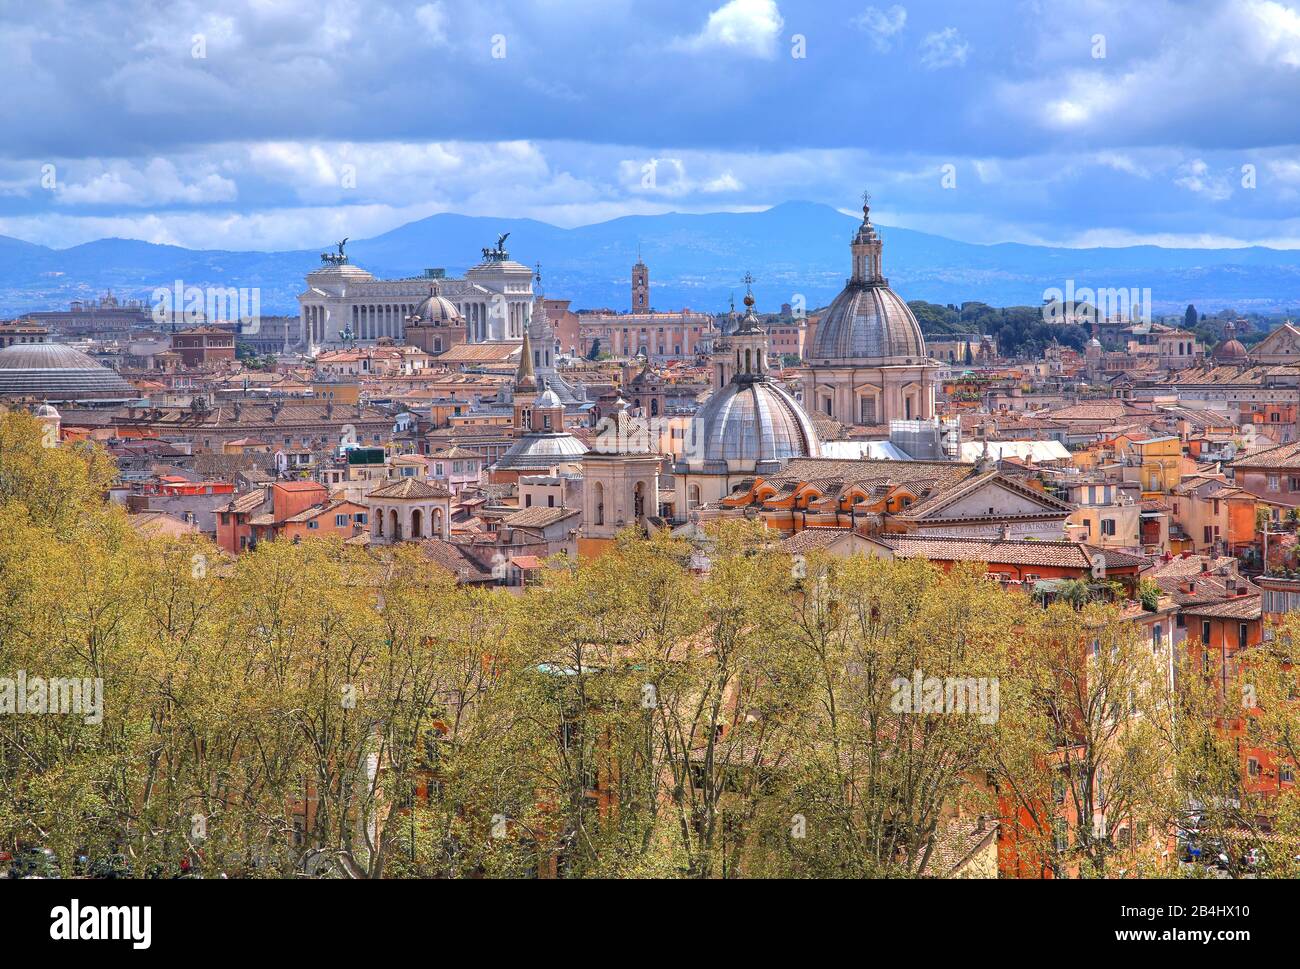 View over the old town roofs on church domes the Vittoriano and the Capitol, Rome, Lazio, Italy Stock Photo